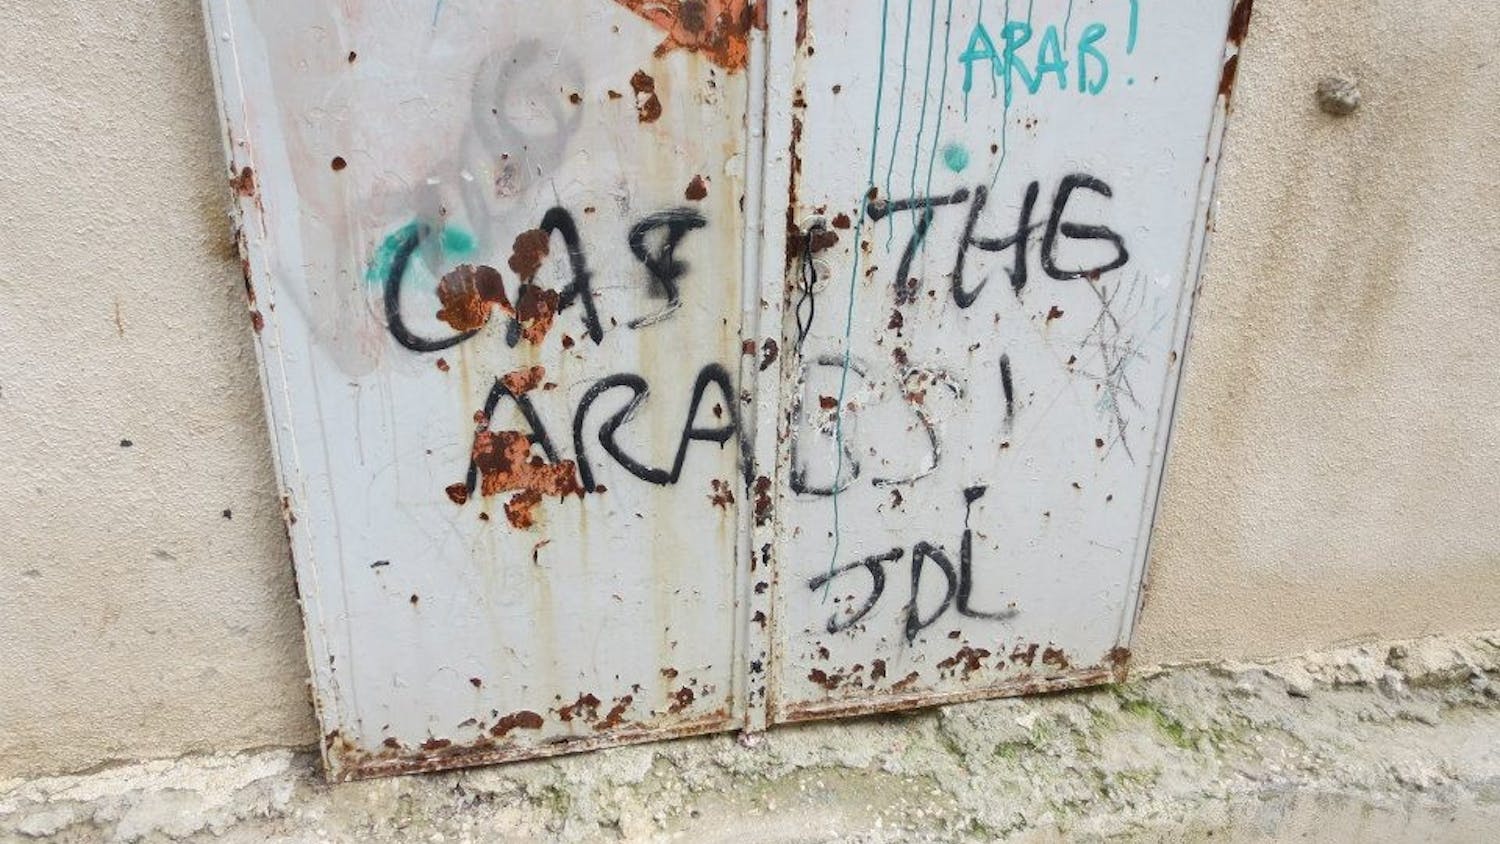 	A picture of graffiti that says &#8220;Gas the Arabs!&#8221; taken by Hank Pin while in Hebron. 